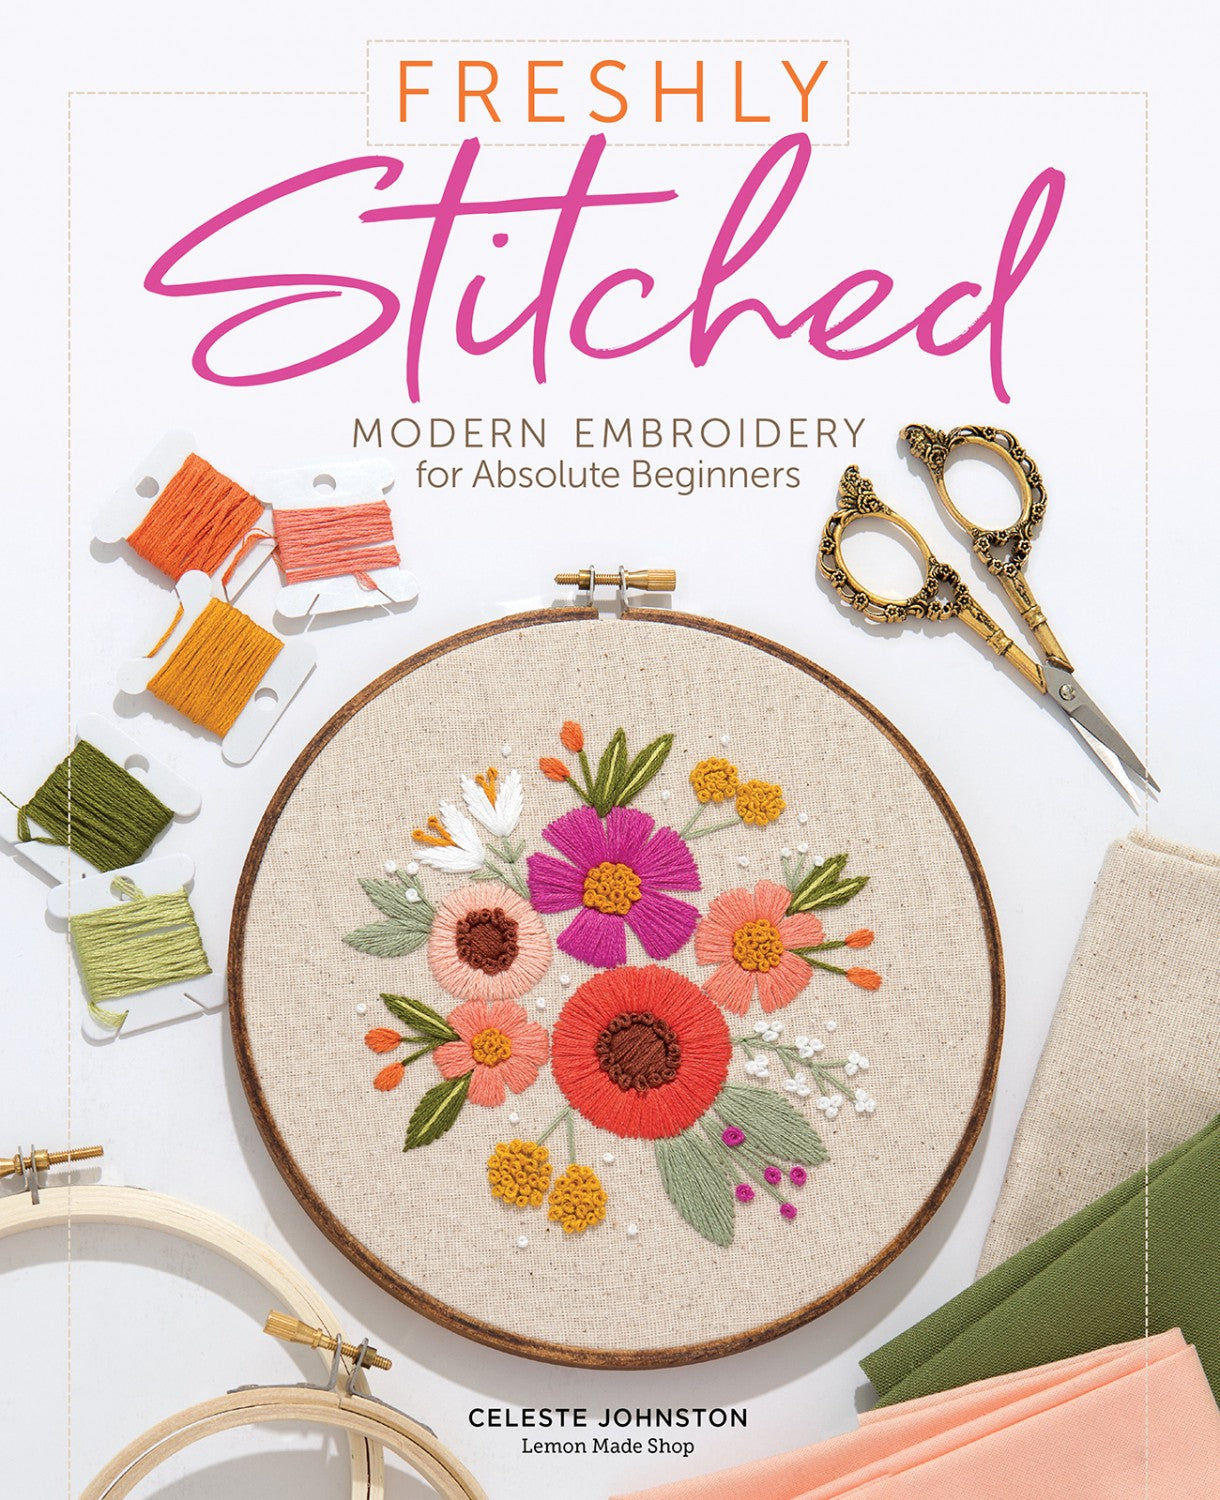 Mastering the Art of Embroidery: Tutorials, Techniques, and Modern Applications [Book]